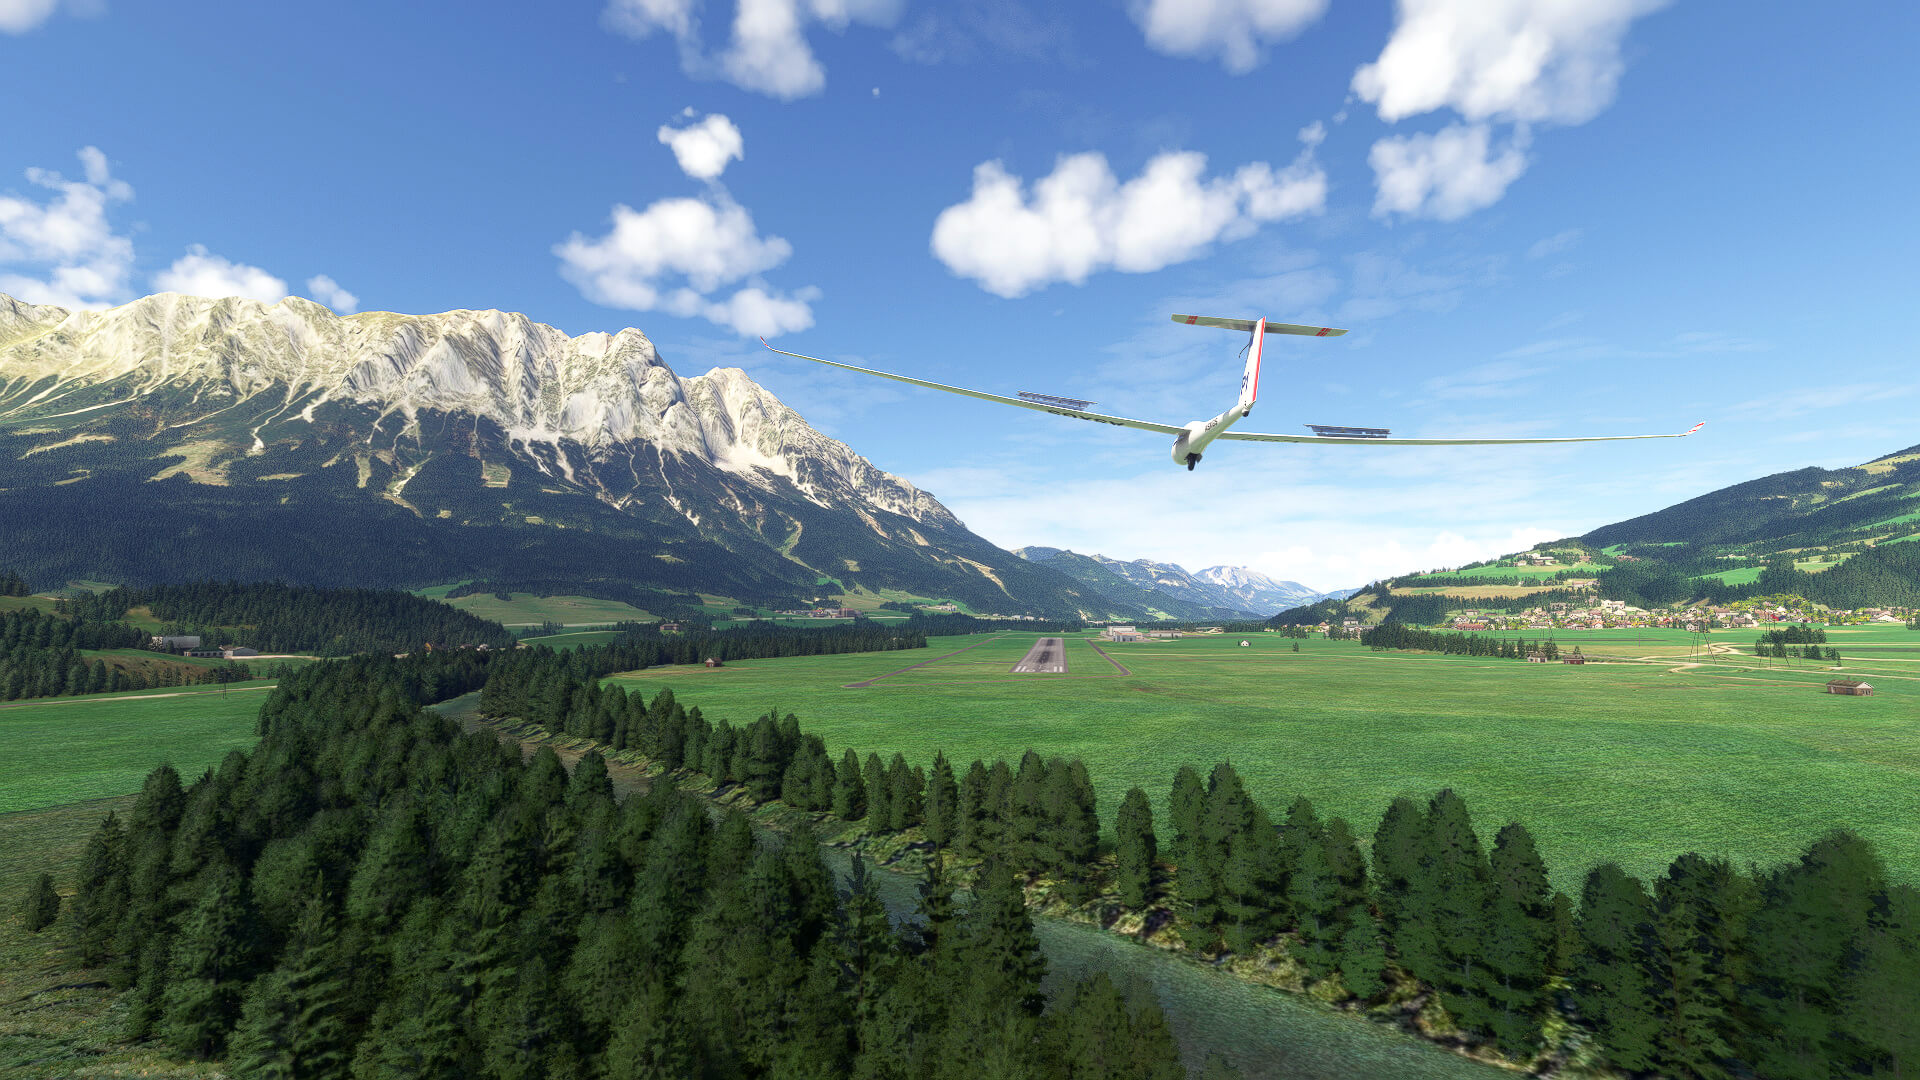 A glider with spoilers deployed and landing gear down approaches a runway in a valley.